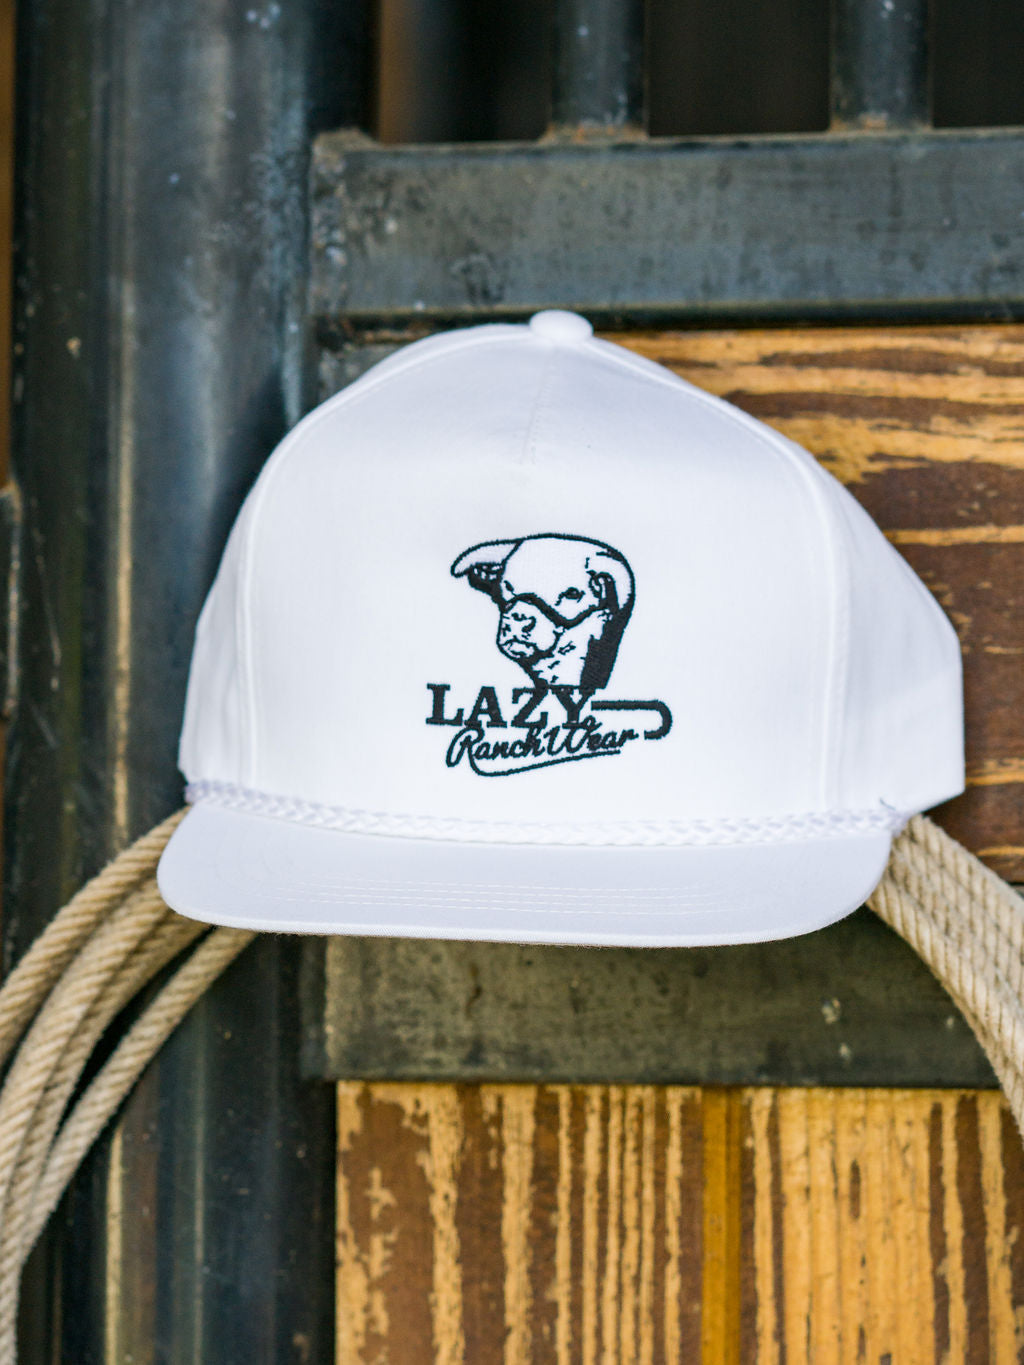 Lazy J Ranch Wear White & White 4" Embroidered White Rope Cap